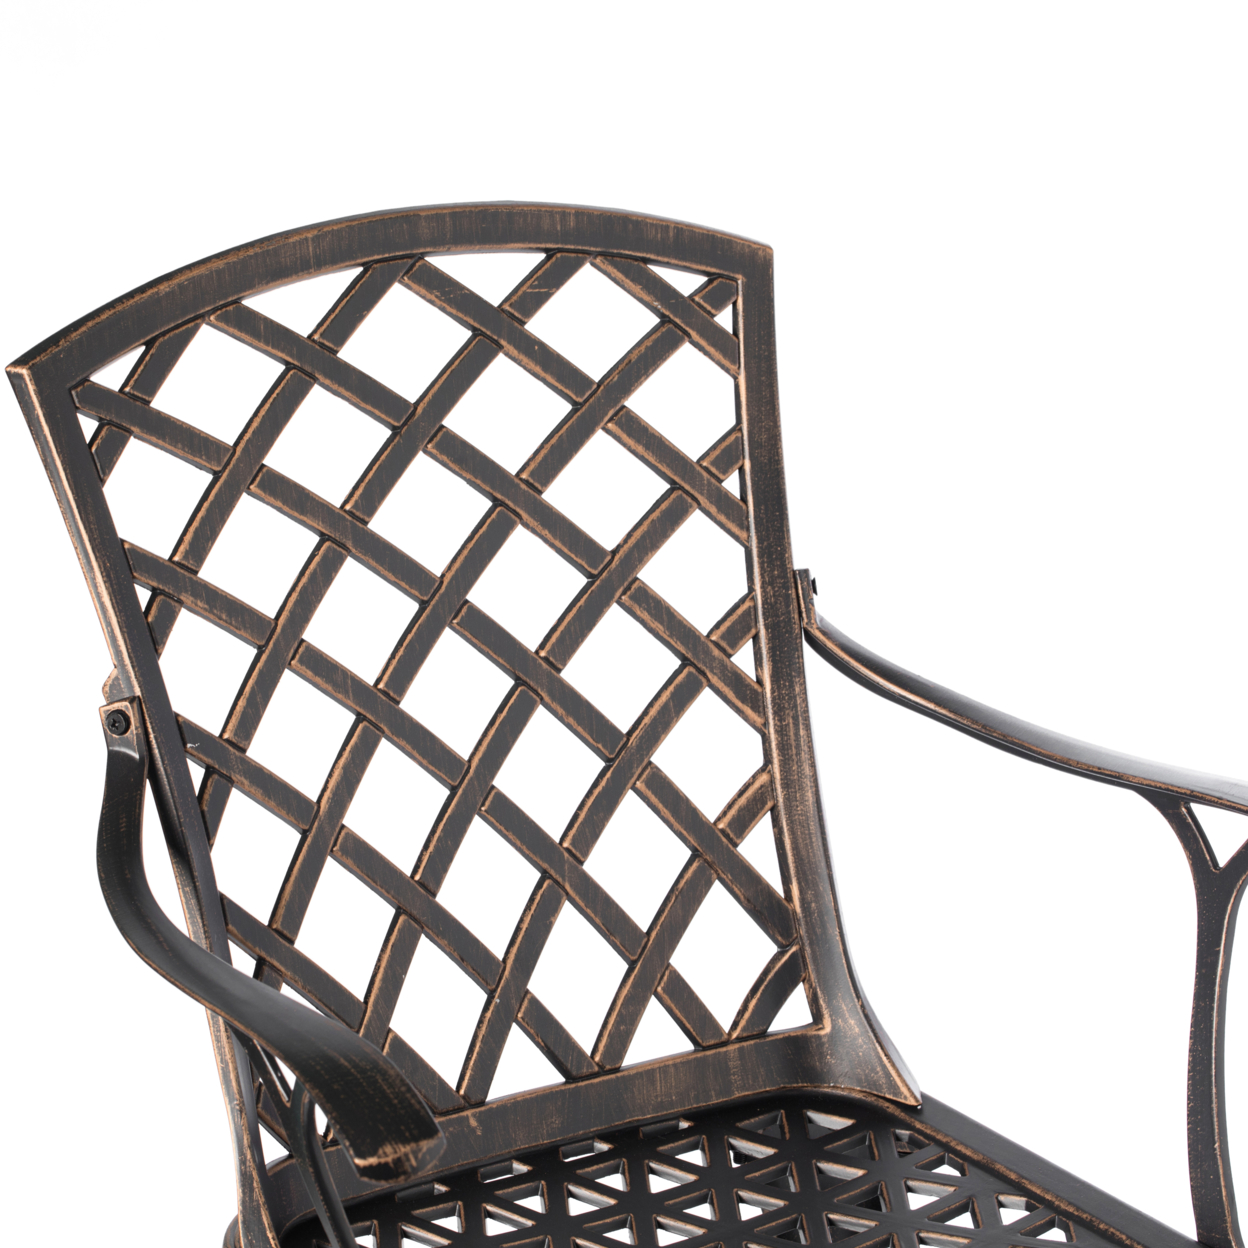 Indoor And Outdoor Bronze Dinning Set 2 Chairs With 1 Table Bistro Cast Aluminum. - Chairs